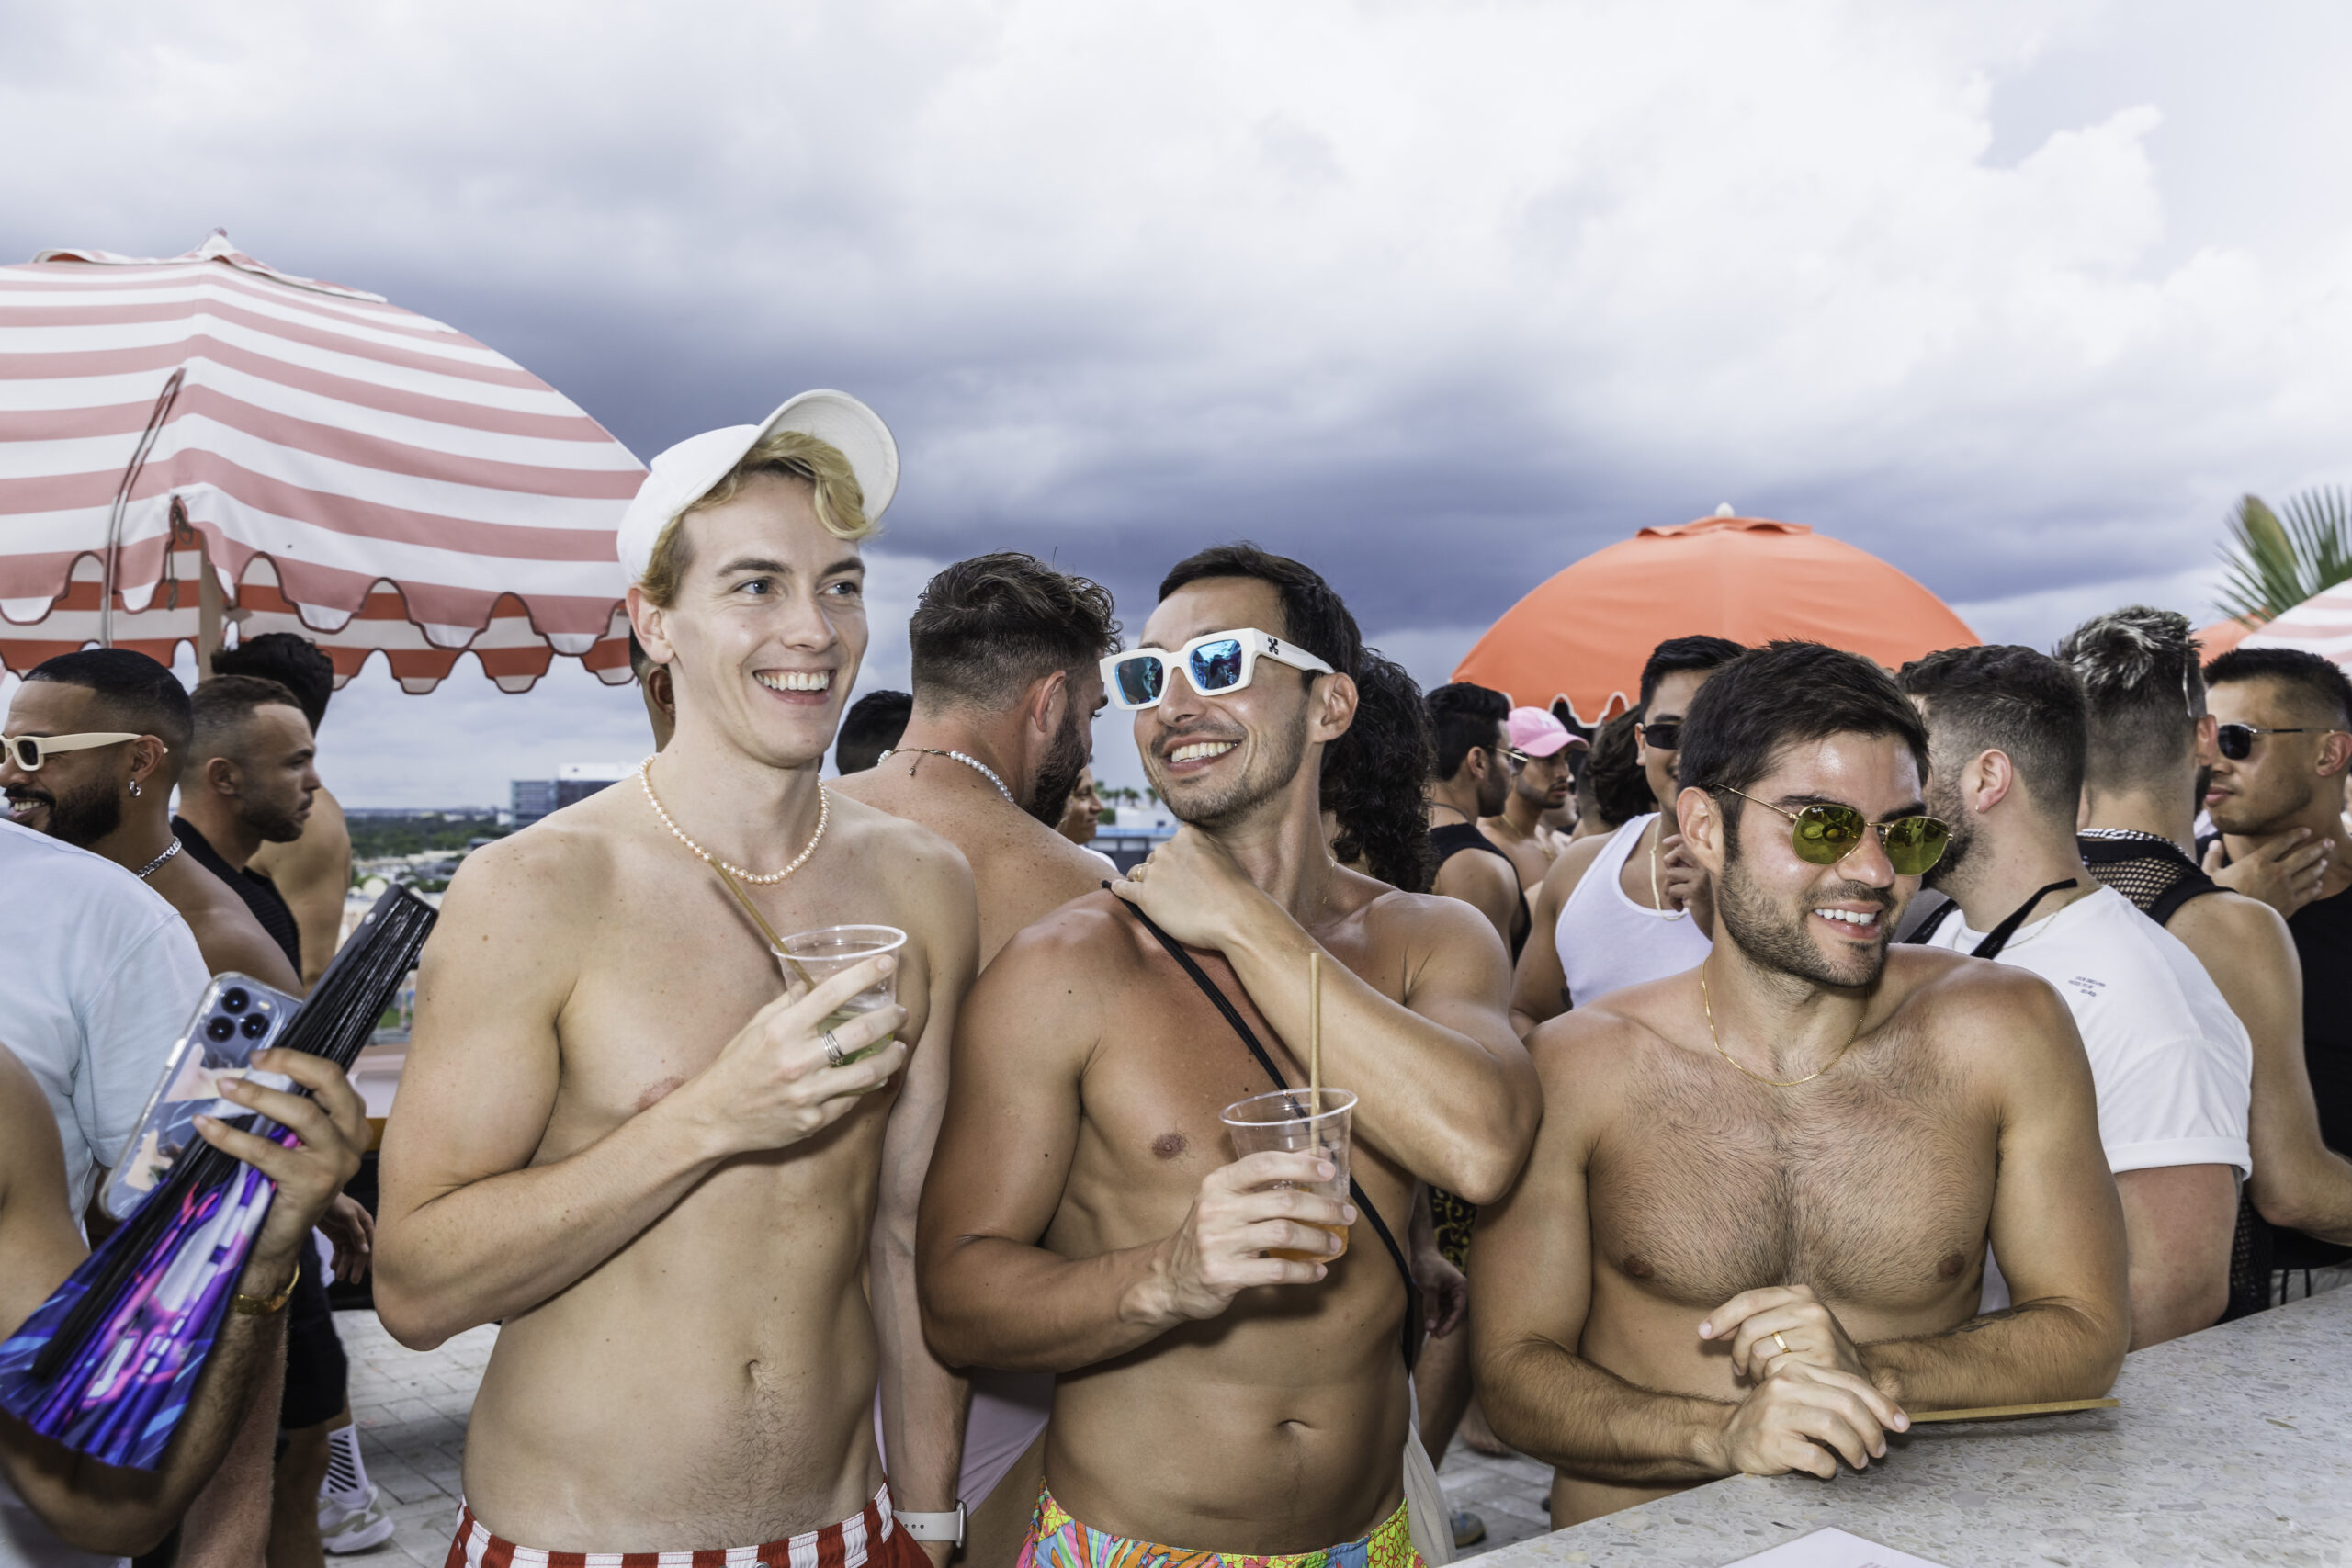 A group of shirtless men enjoying drinks and smiling at an outdoor event with striped umbrellas in the background.